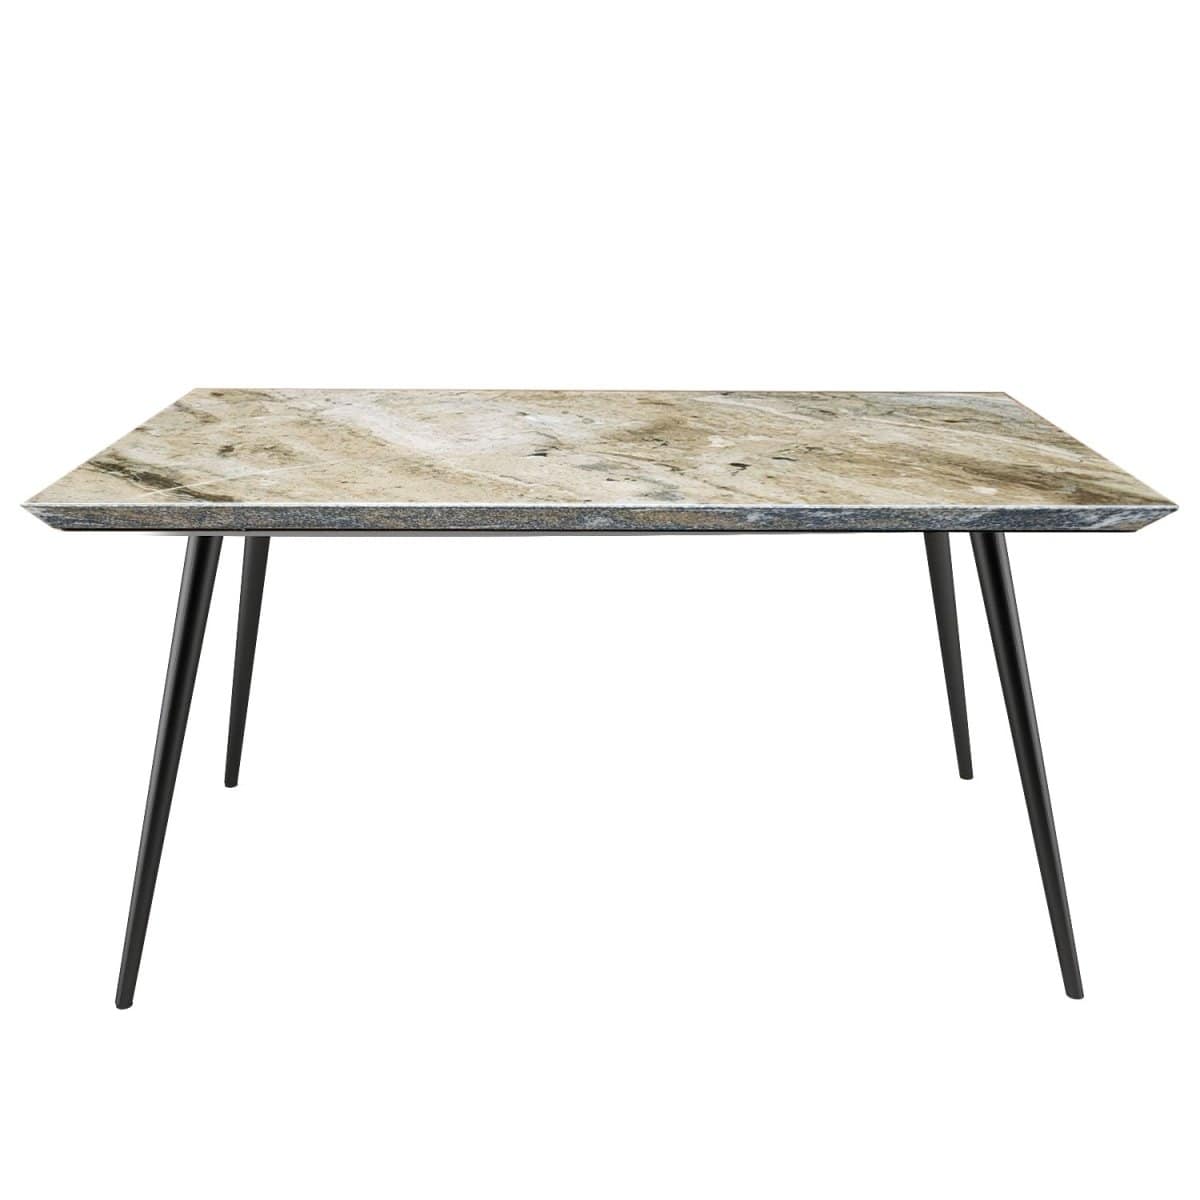 Gary 1.6m Sintered Stone Top Dining Table (DF003T) picket and rail